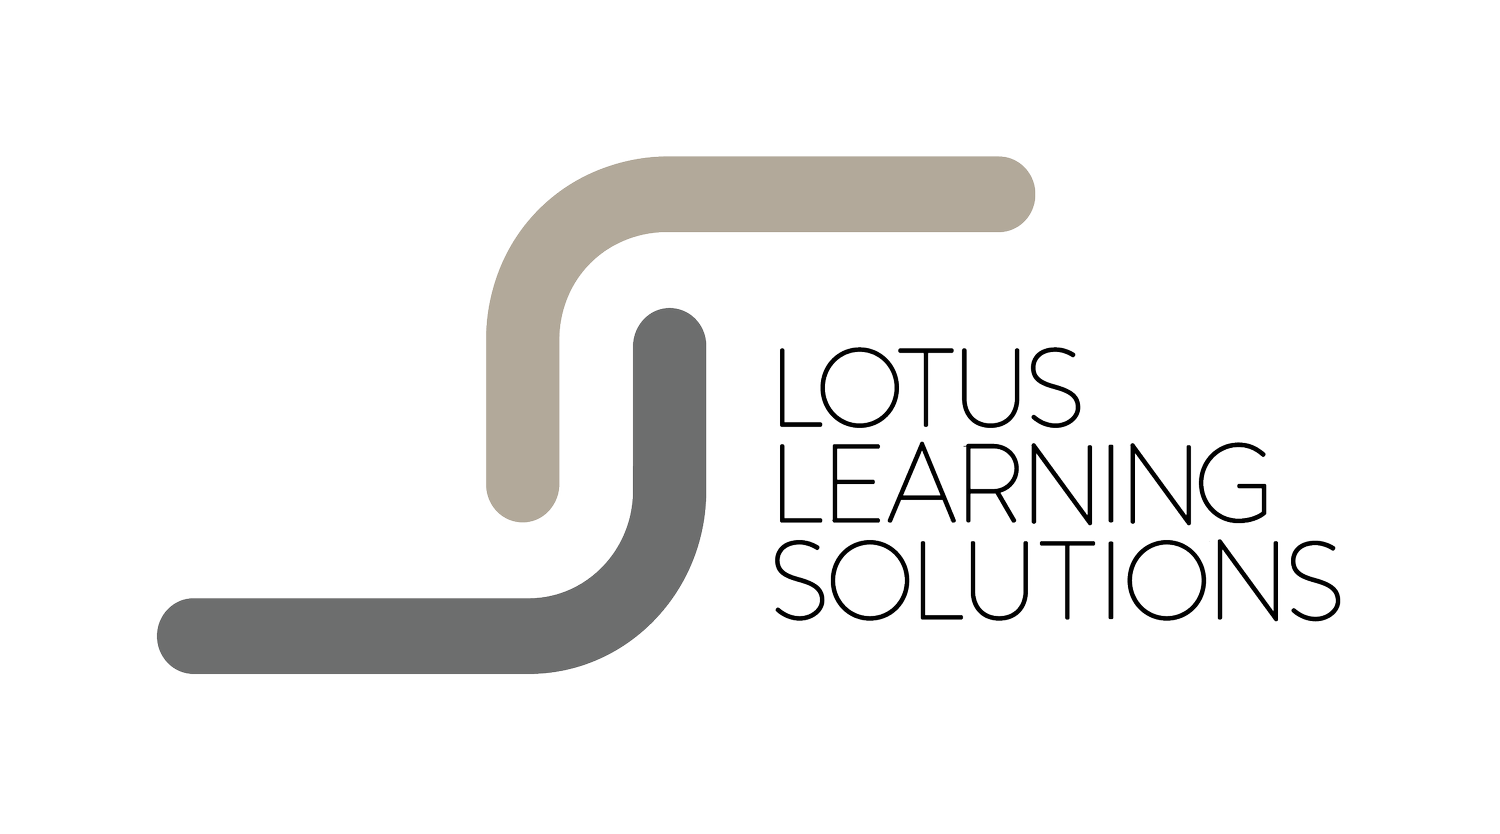 Lotus Learning Solutions